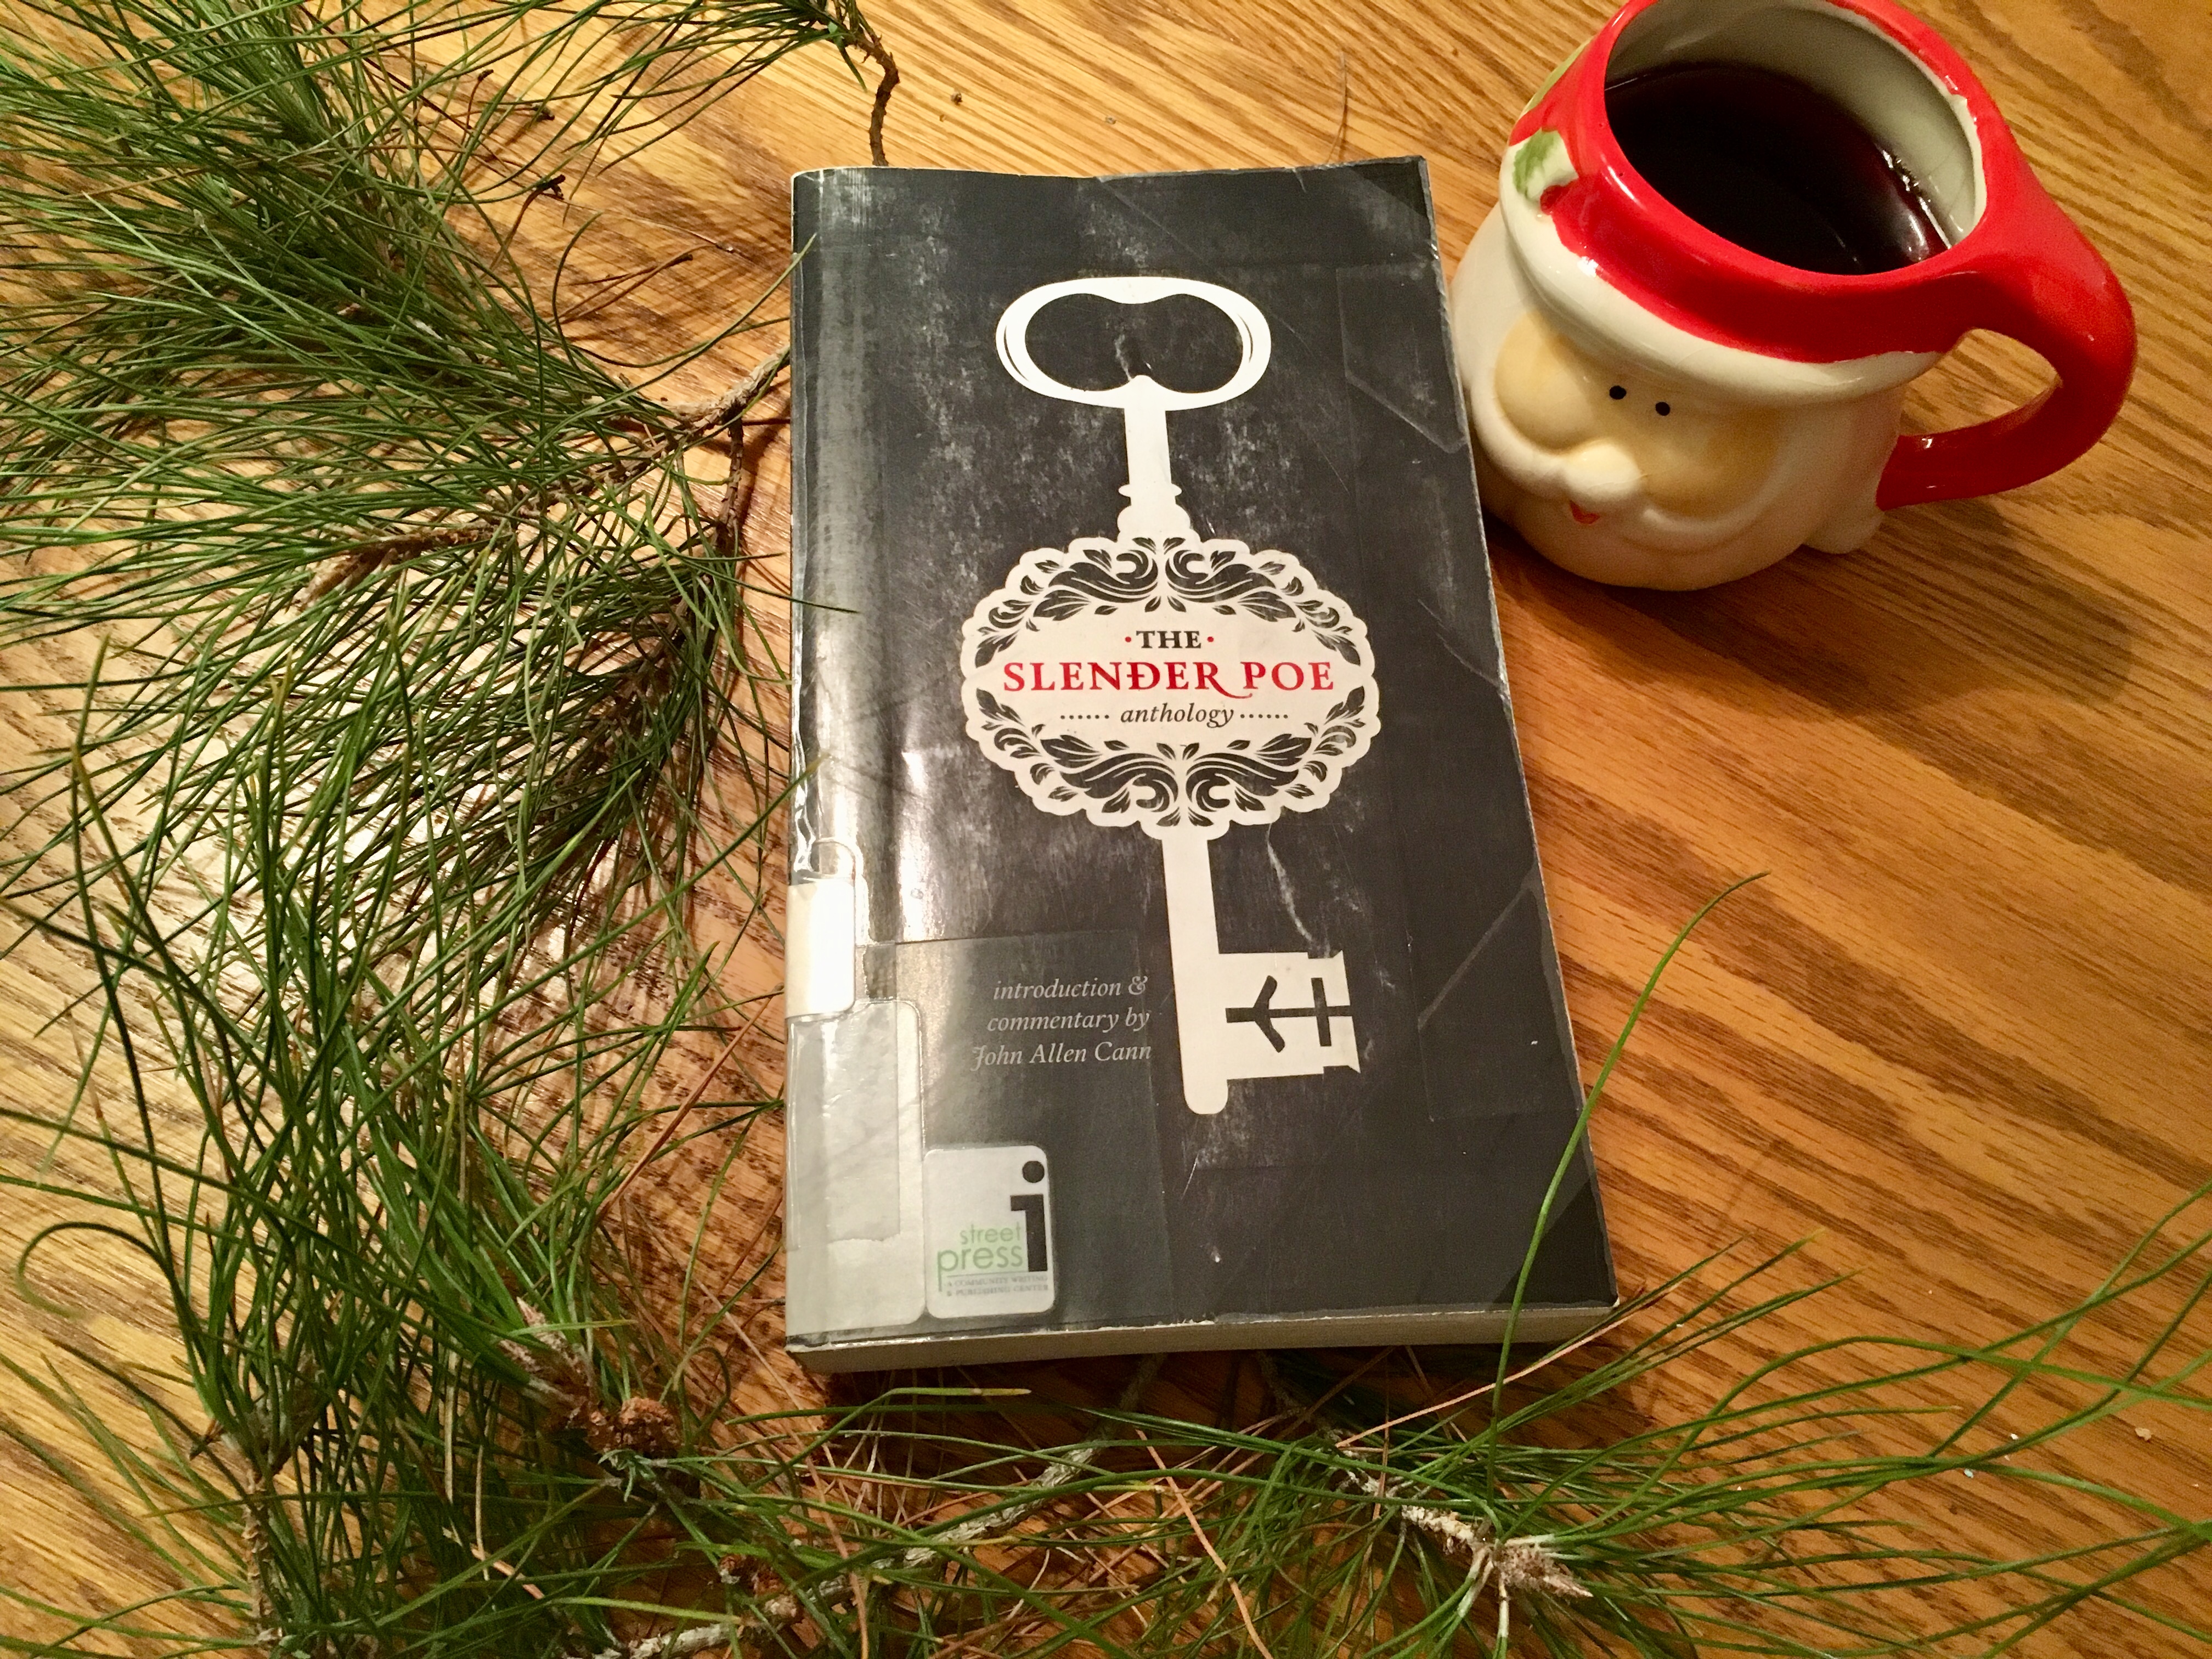 The Slender Poe Anthology paperback on wood table next to pine needles and coffee in Santa mug